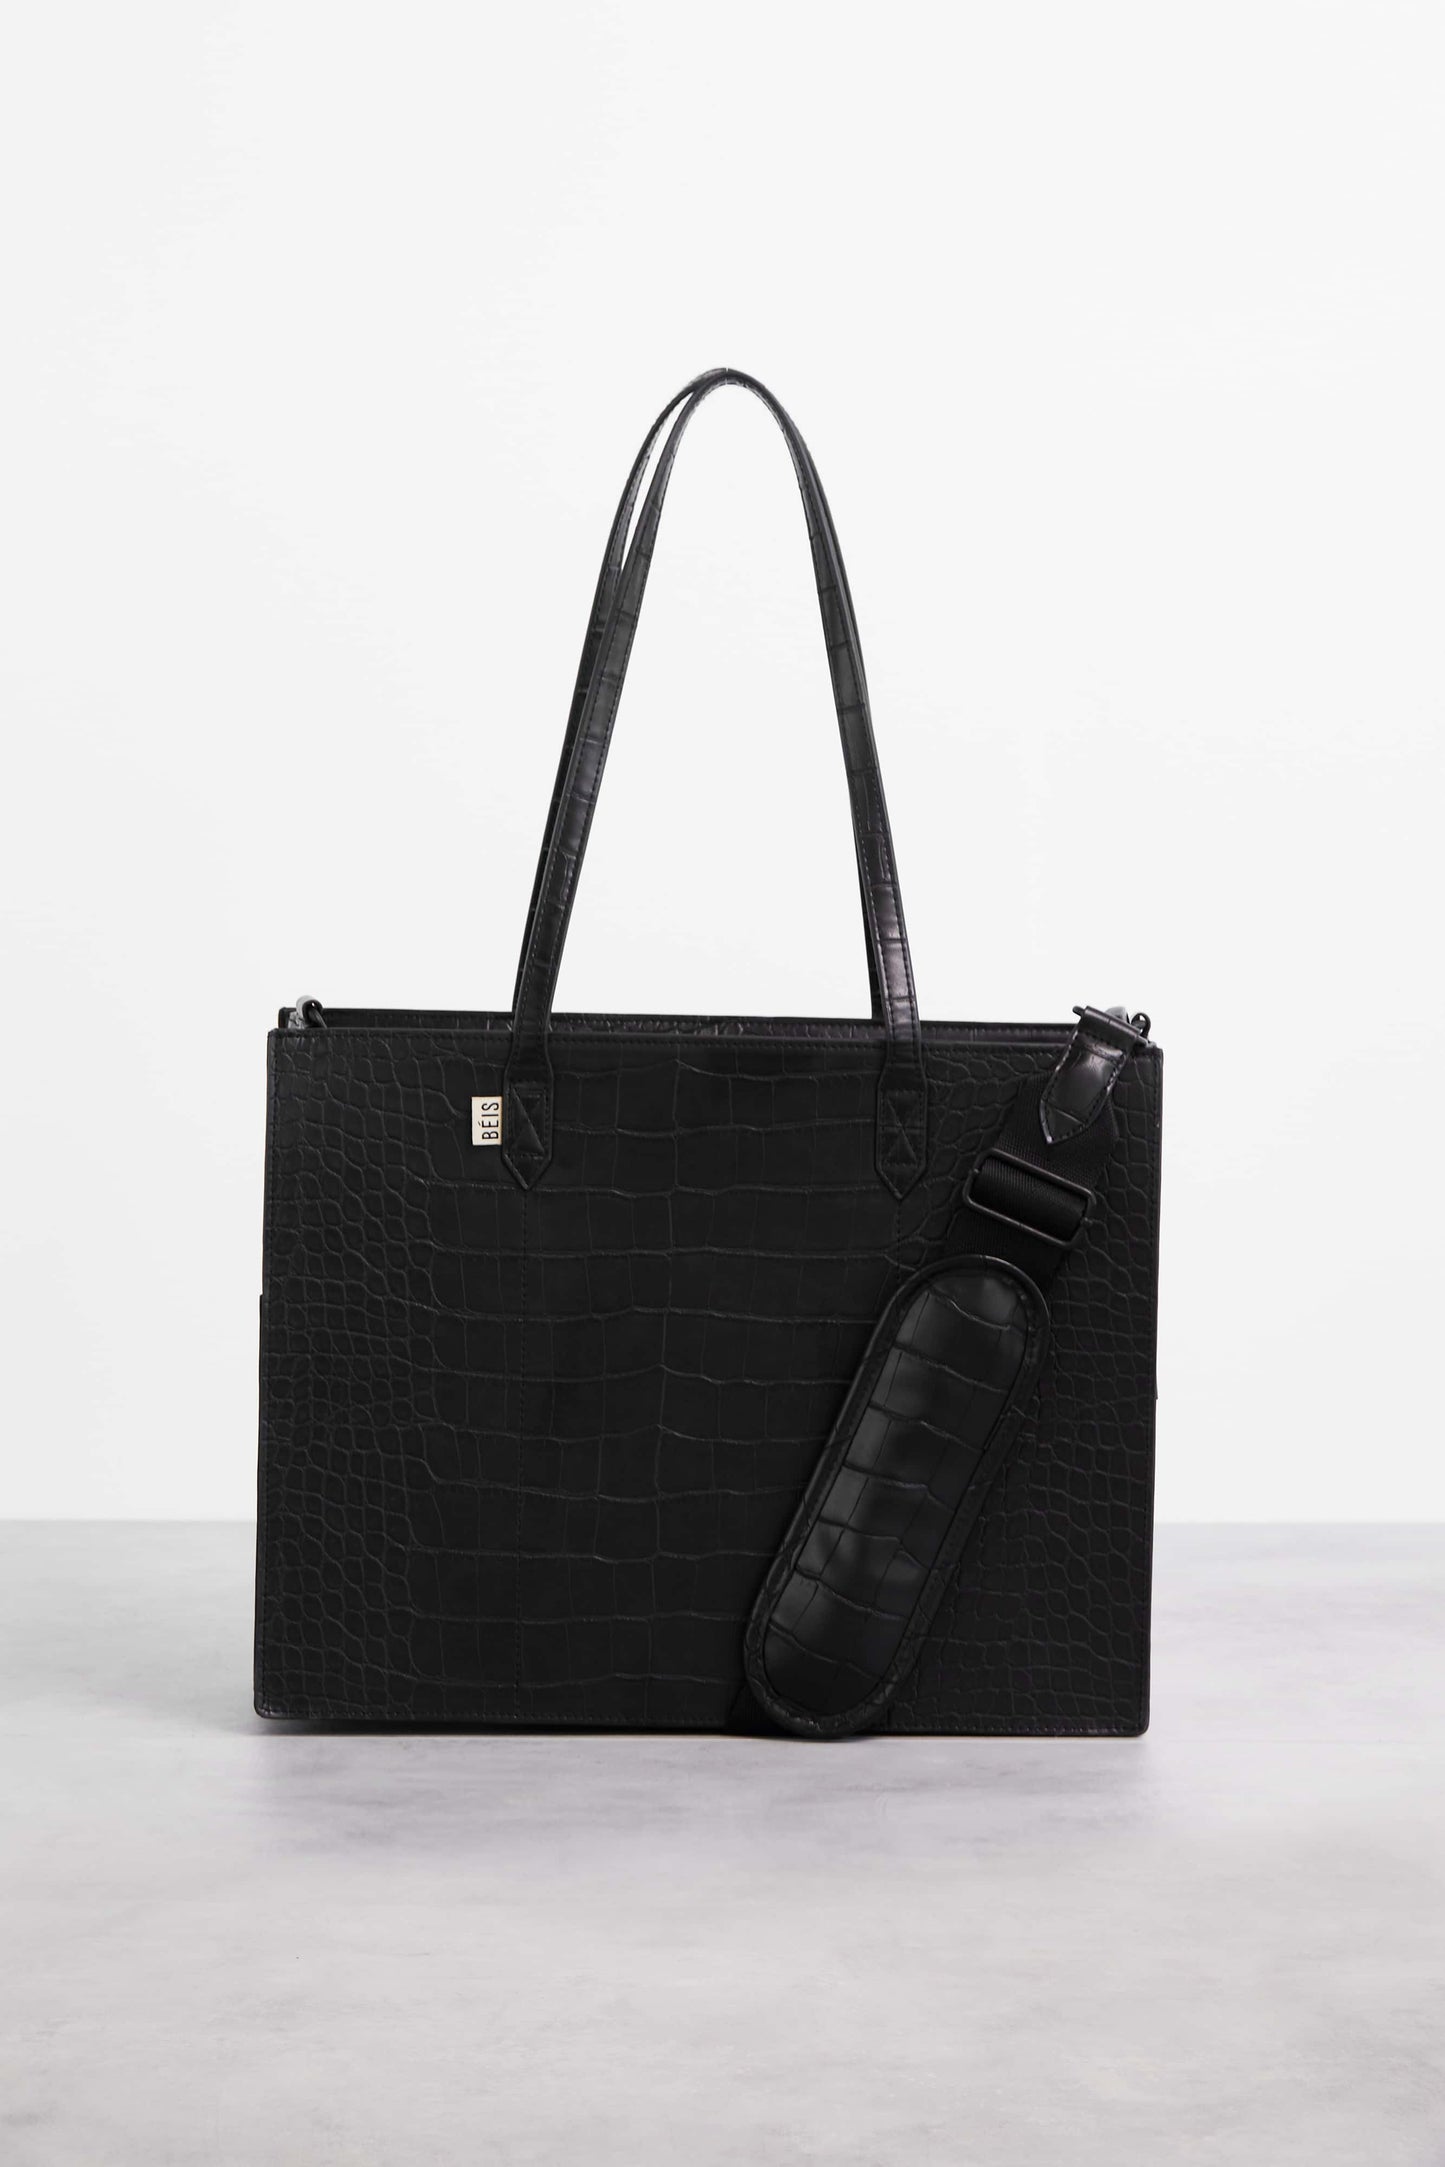 Mini Work Tote in Black Croc Front with Shoulder Strap